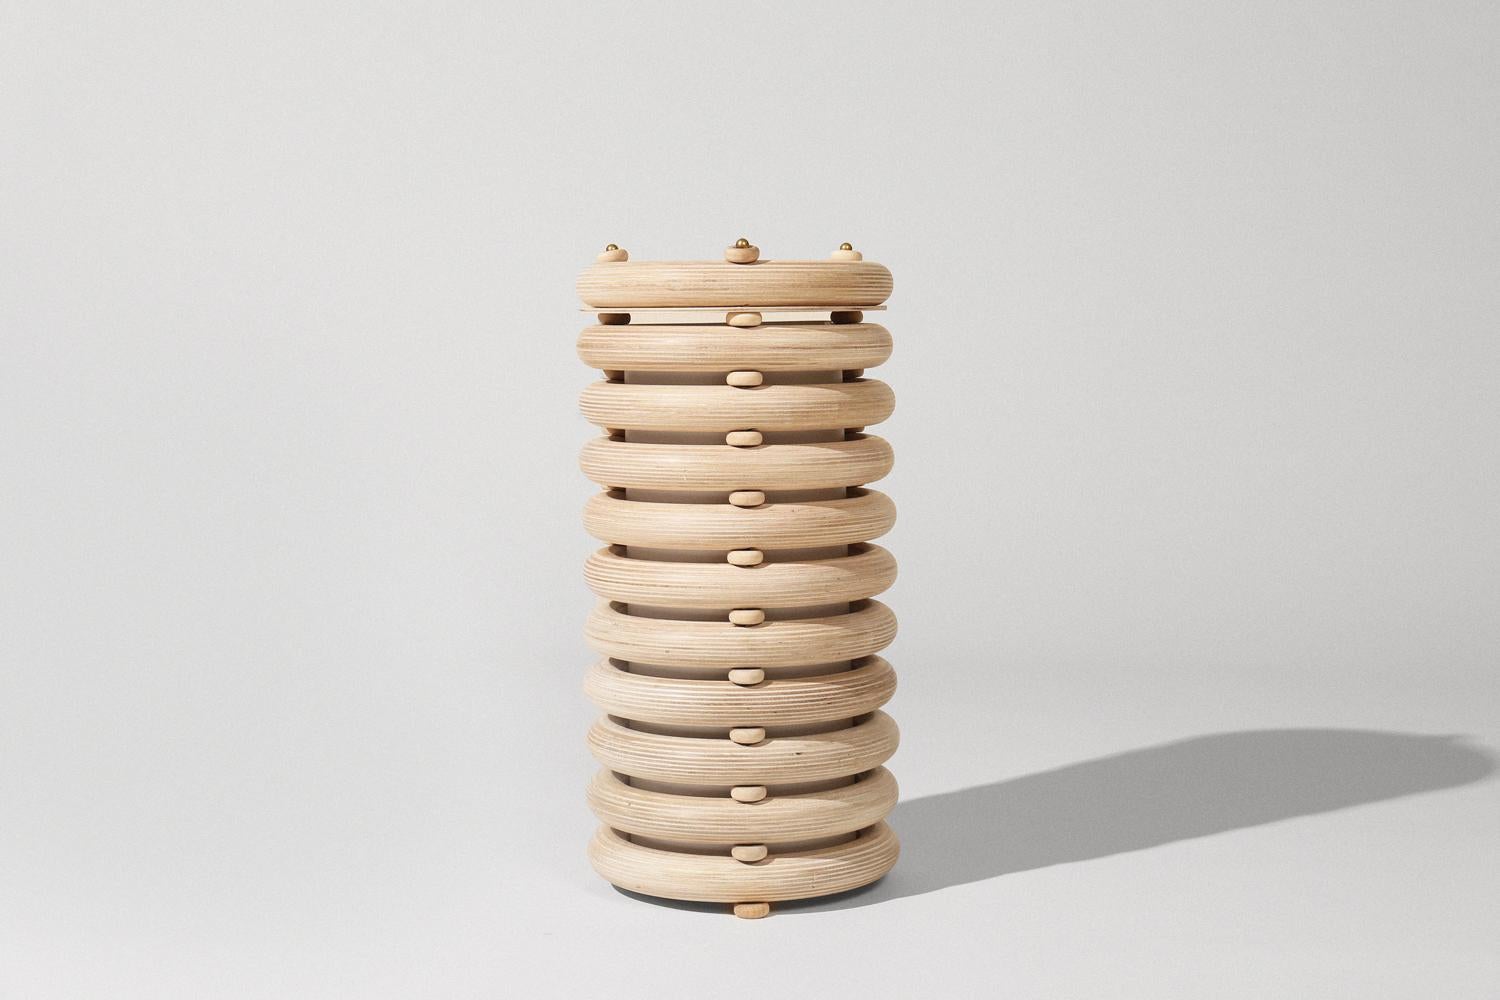 Made to order. Please allow six weeks for production.

The Echo family of sculptural totems pairs tropical warmth with Minimalist appeal. Made of stacked finely finished birch, the totems have an architectural rigidity and a soft visual appeal. The